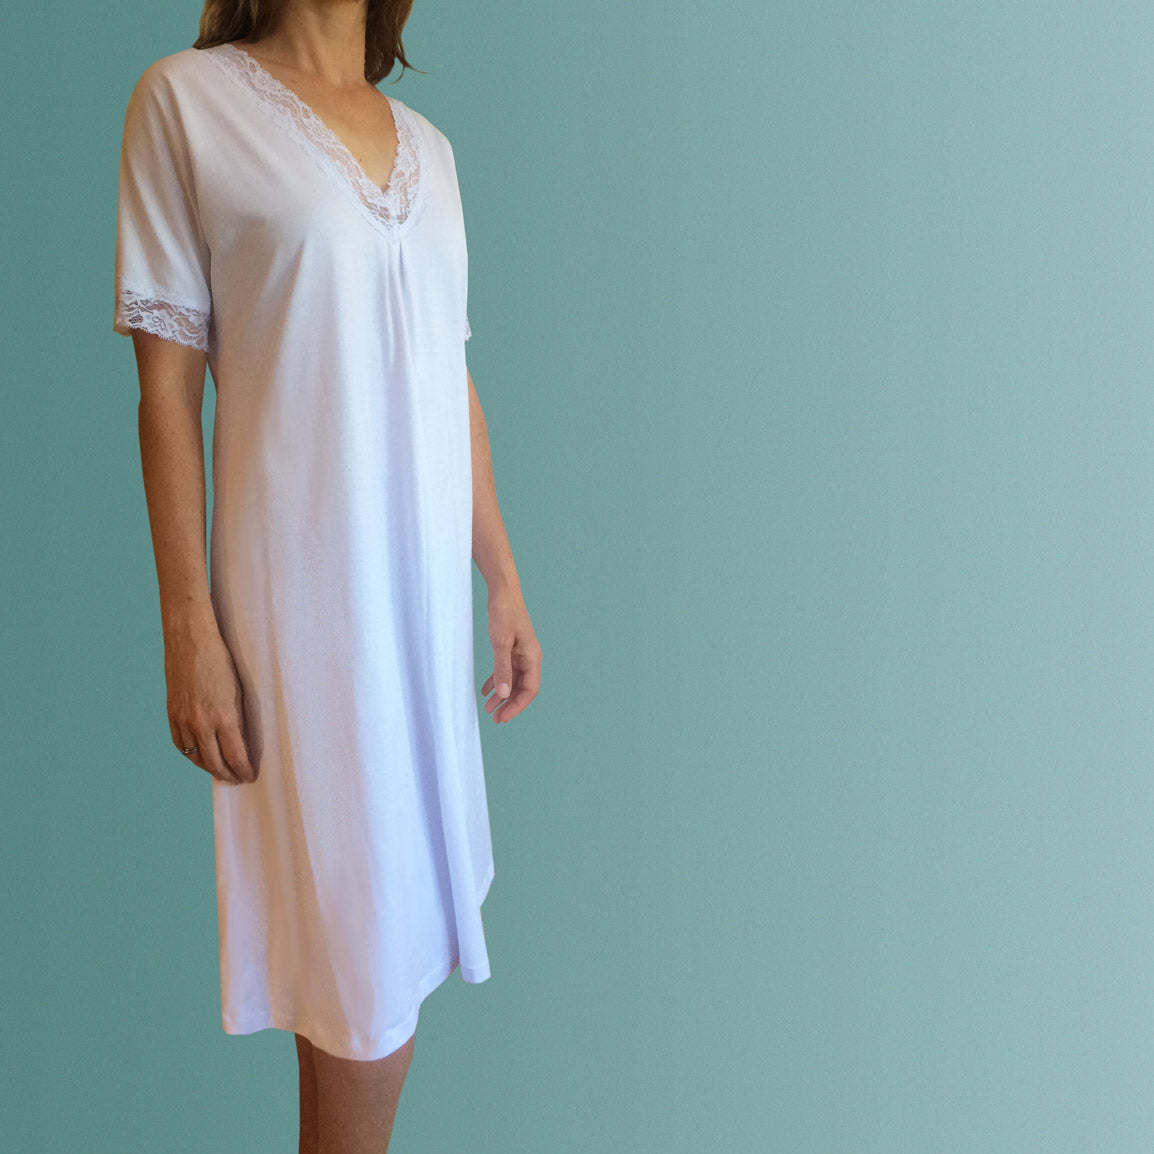 Nighties for plus size. Organic cotton and lace nightgown made in Australia.